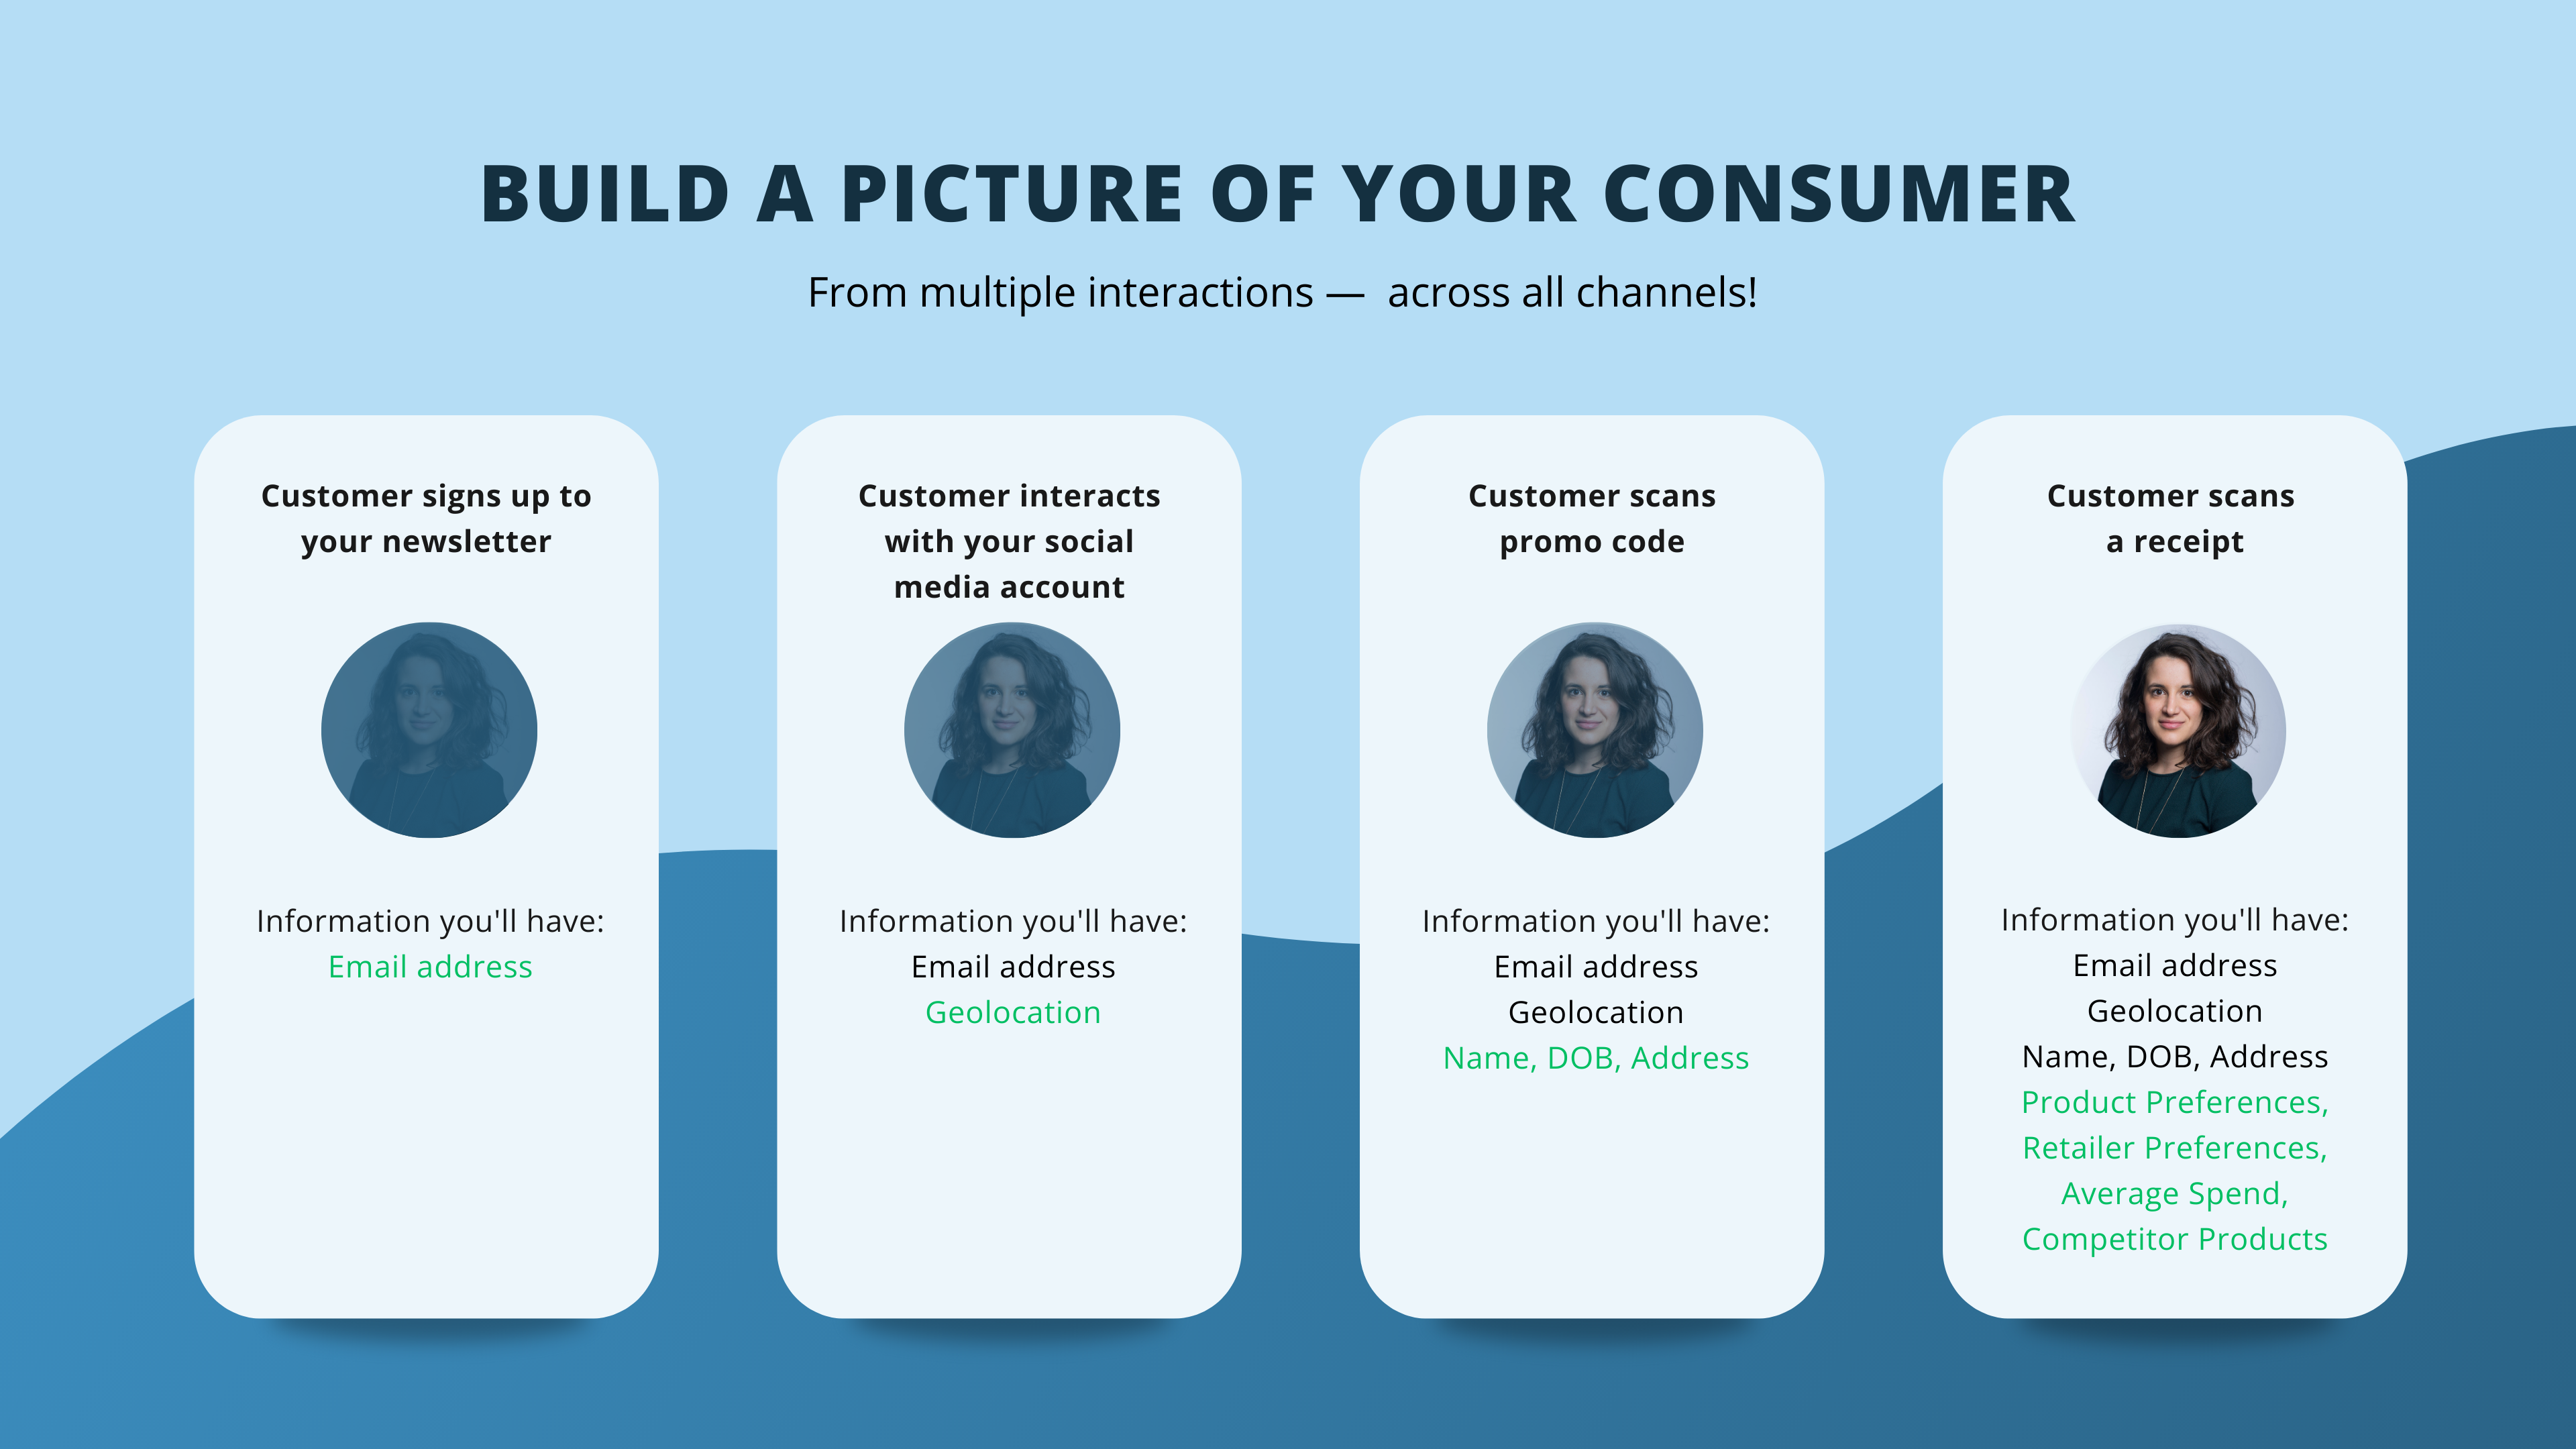 Build the full picture of your consumer